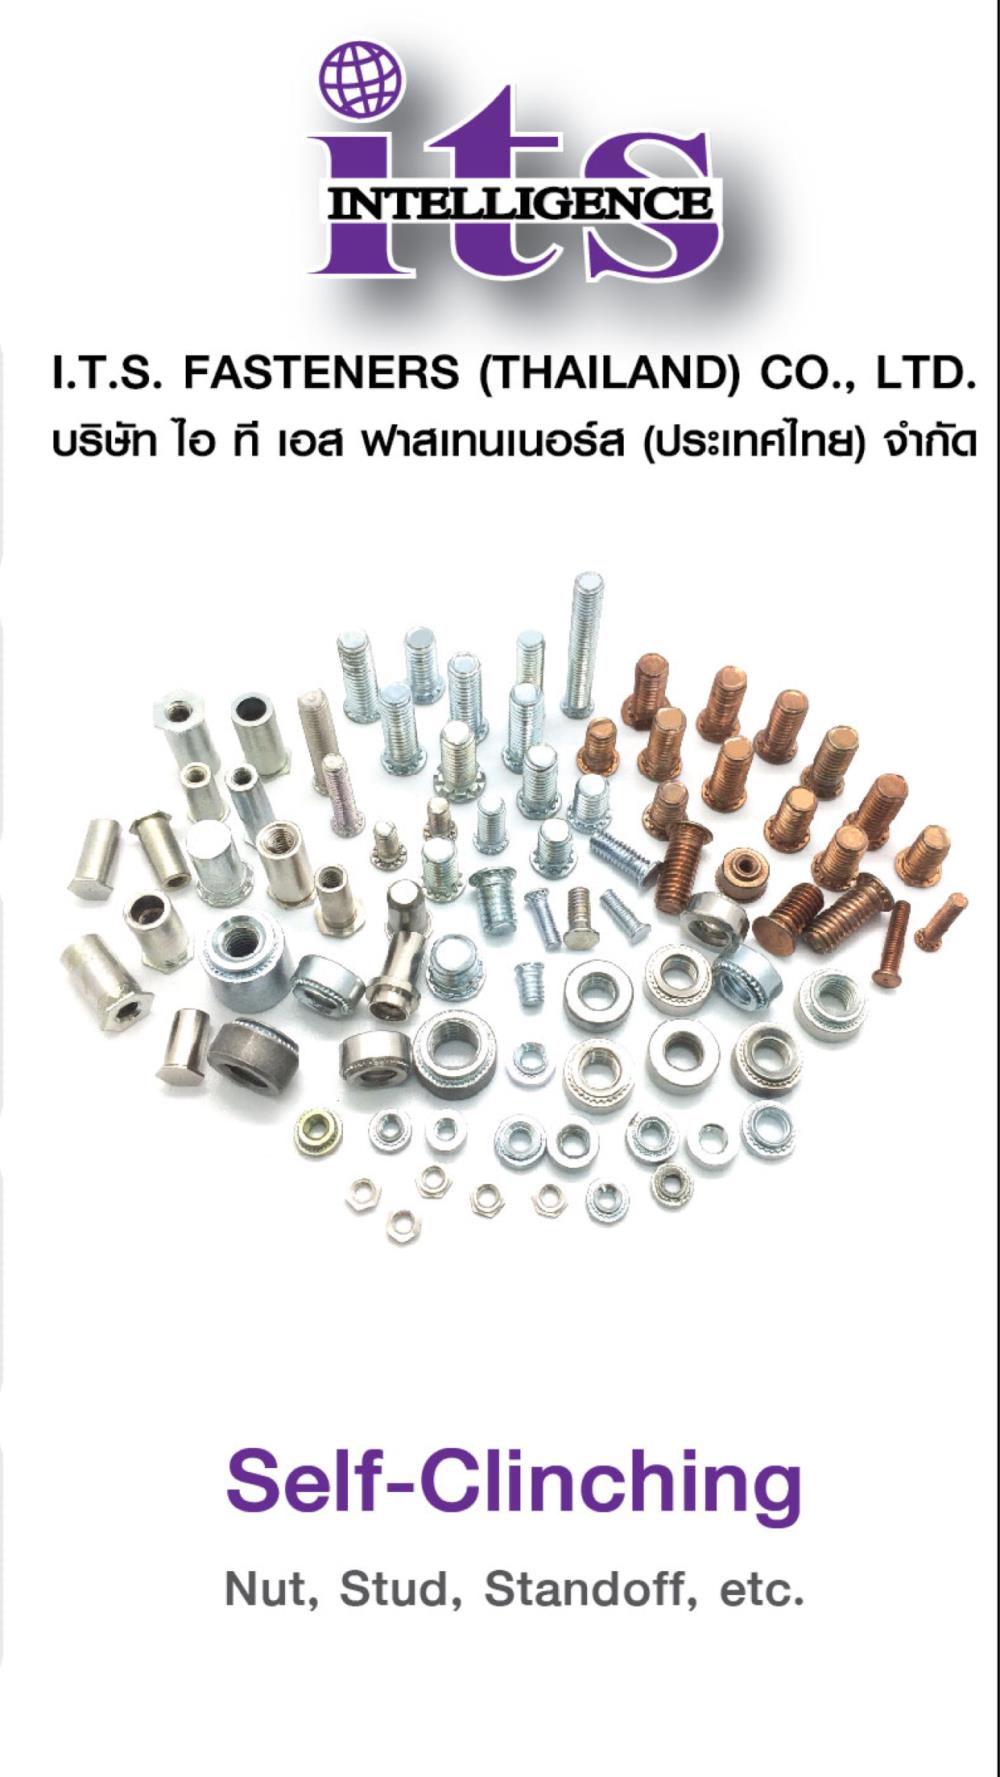 Self-Clinching Fasteners such as Clinching Stud , Clinching Nut , Clinching Standoff , Clinching Spacer , Pin,Clinching , PEM , Press Stud , Press Nut,NO BRAND,Hardware and Consumable/Fasteners